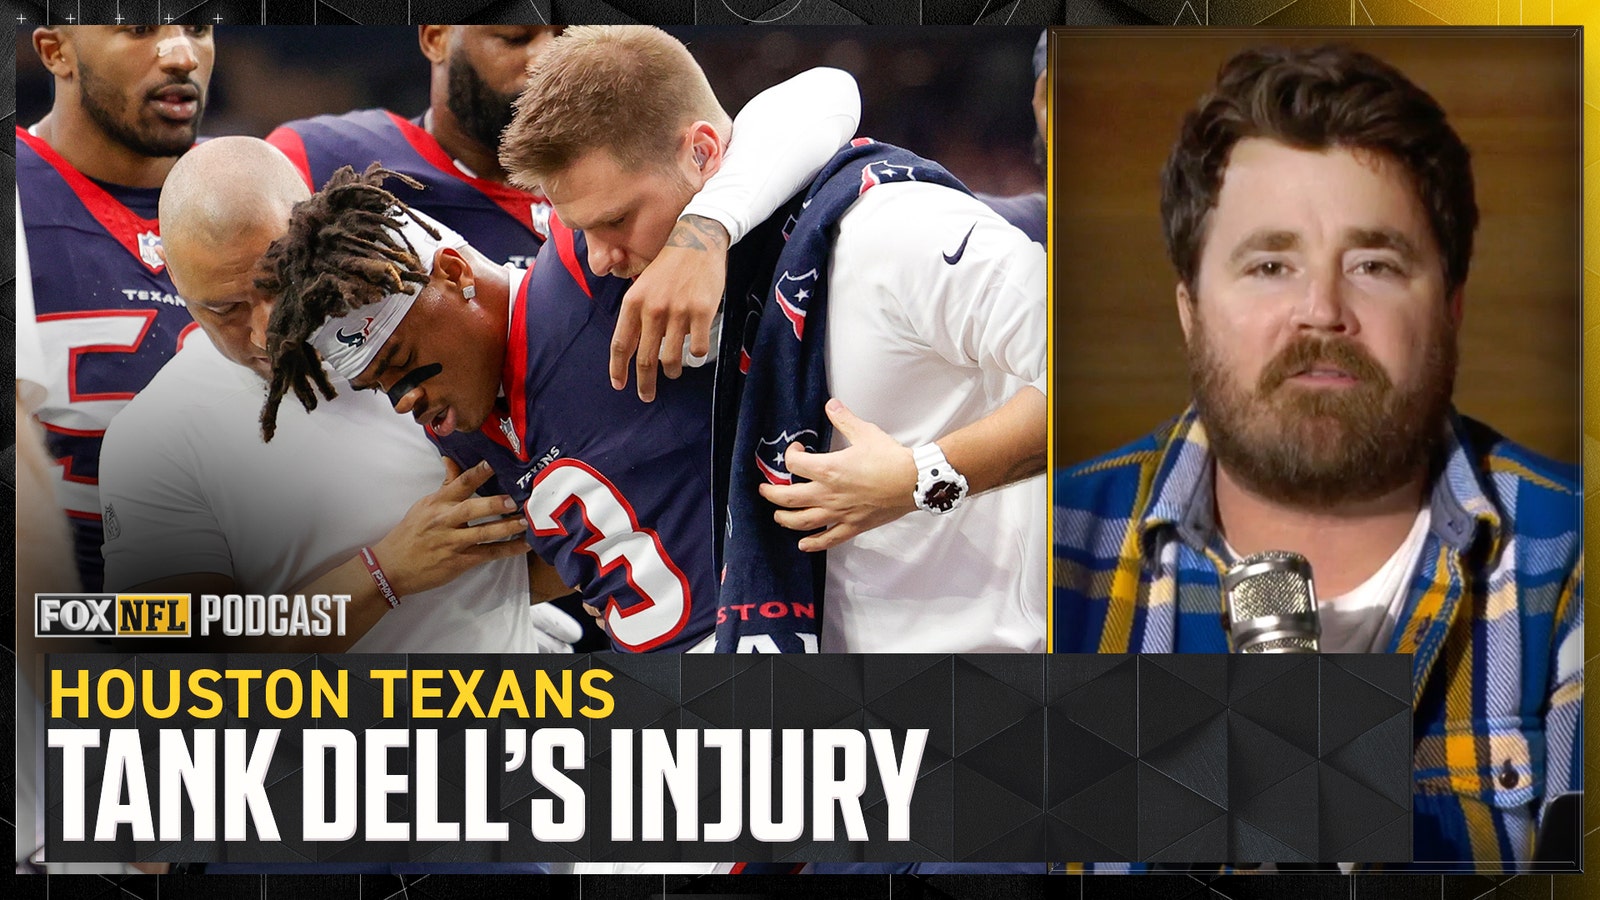 How much does Tank Dell's injury hurt the Texans?